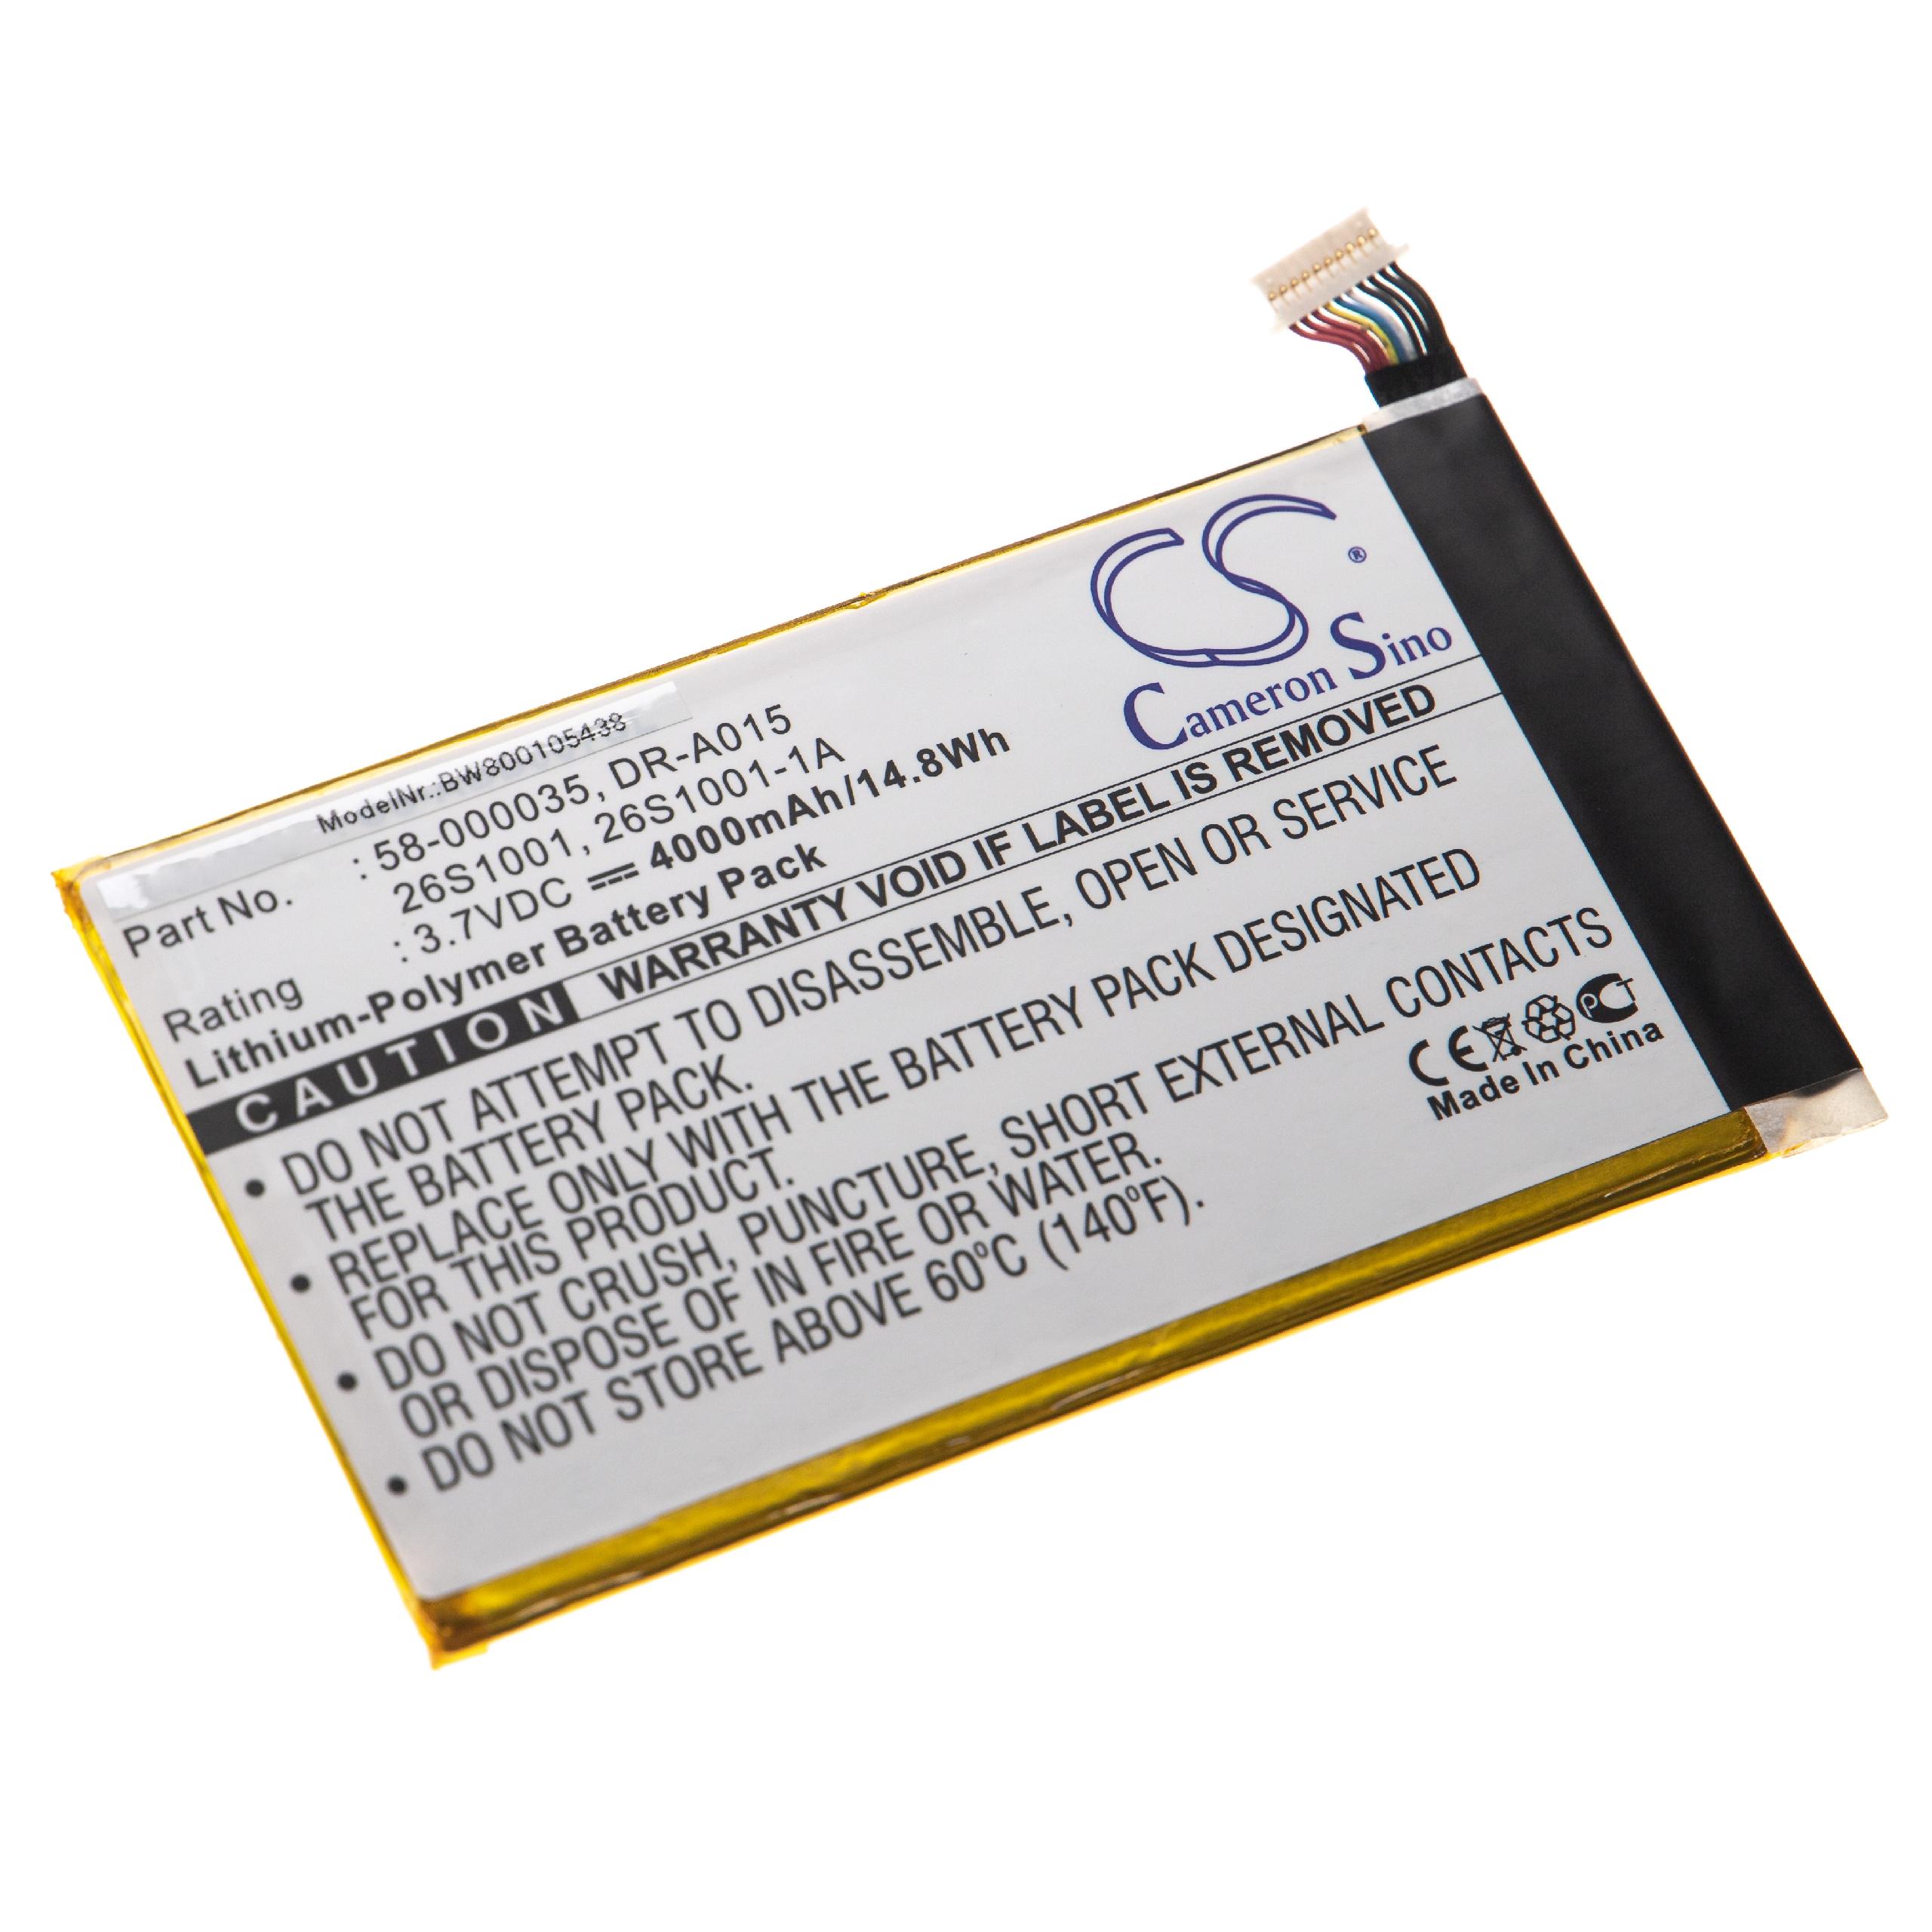 E-Book Battery Replacement for Amazon 26S1001 - 4000mAh 3.7V Li-polymer